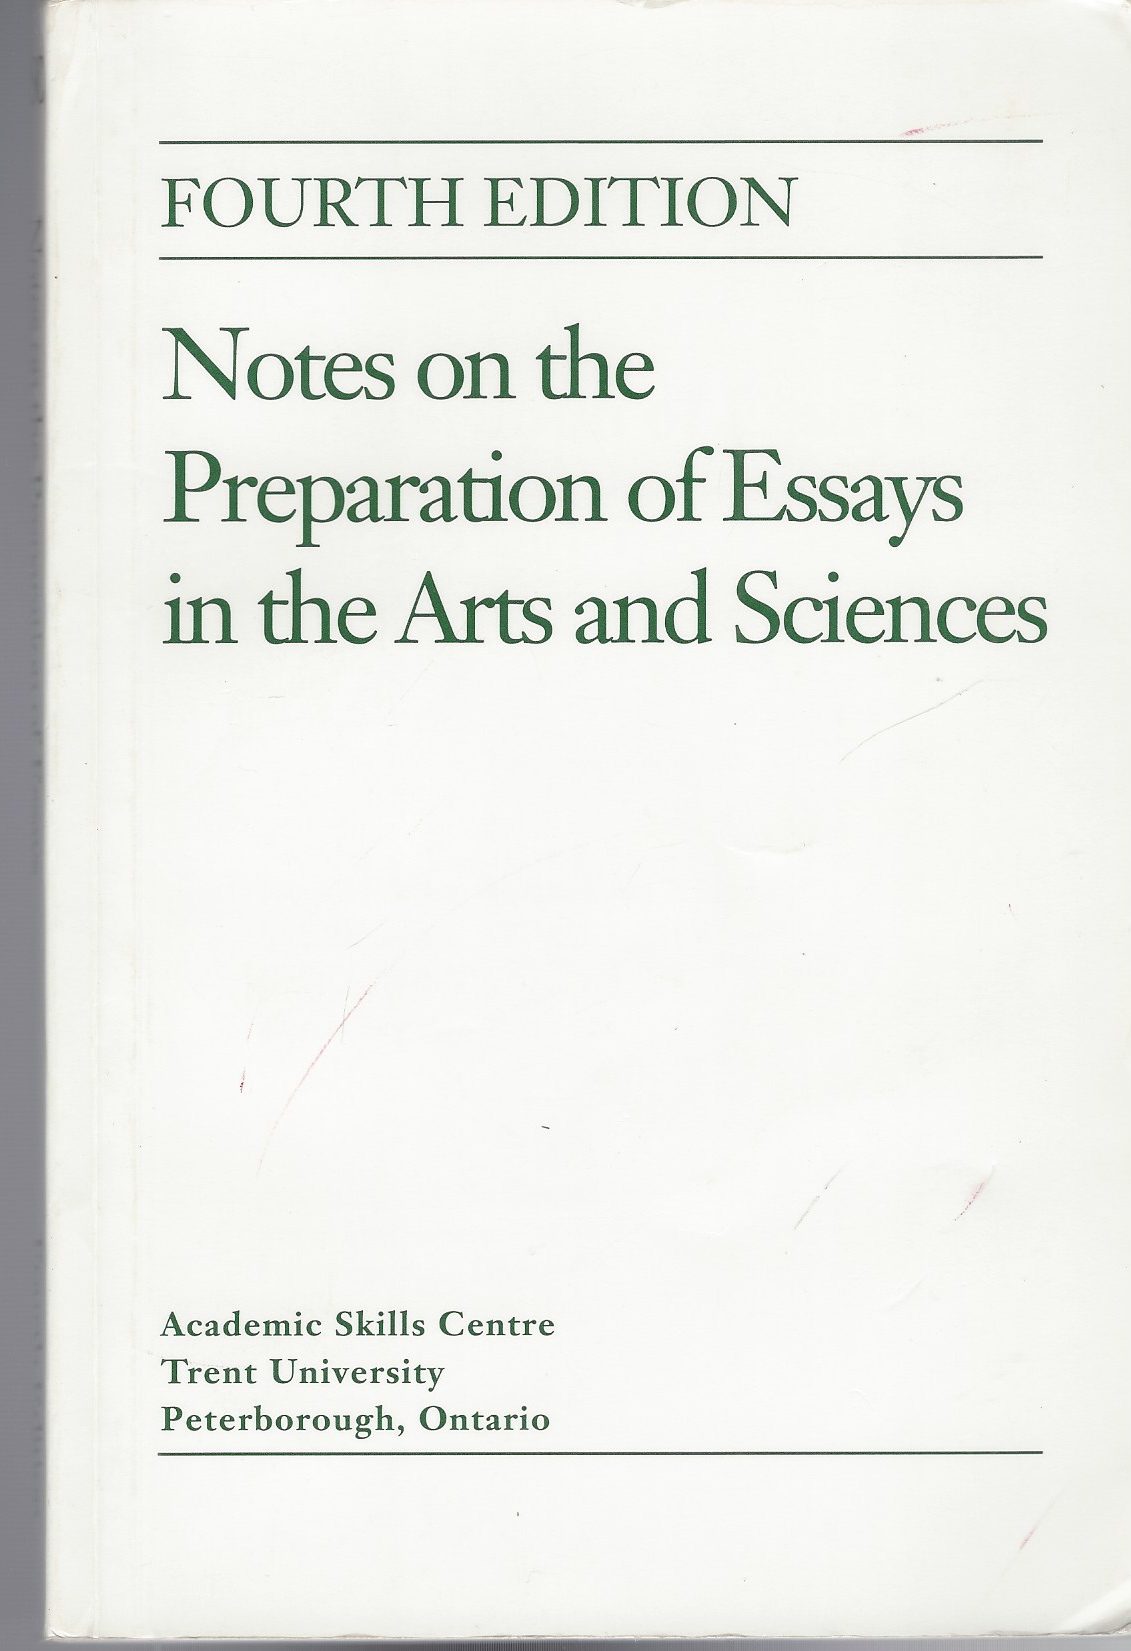 STRATH LUCILLE, AVERY HEATHER, TAYLOR KAREN - Notes on the Preparation of Essays in the Arts and Sciences Fourth Edition